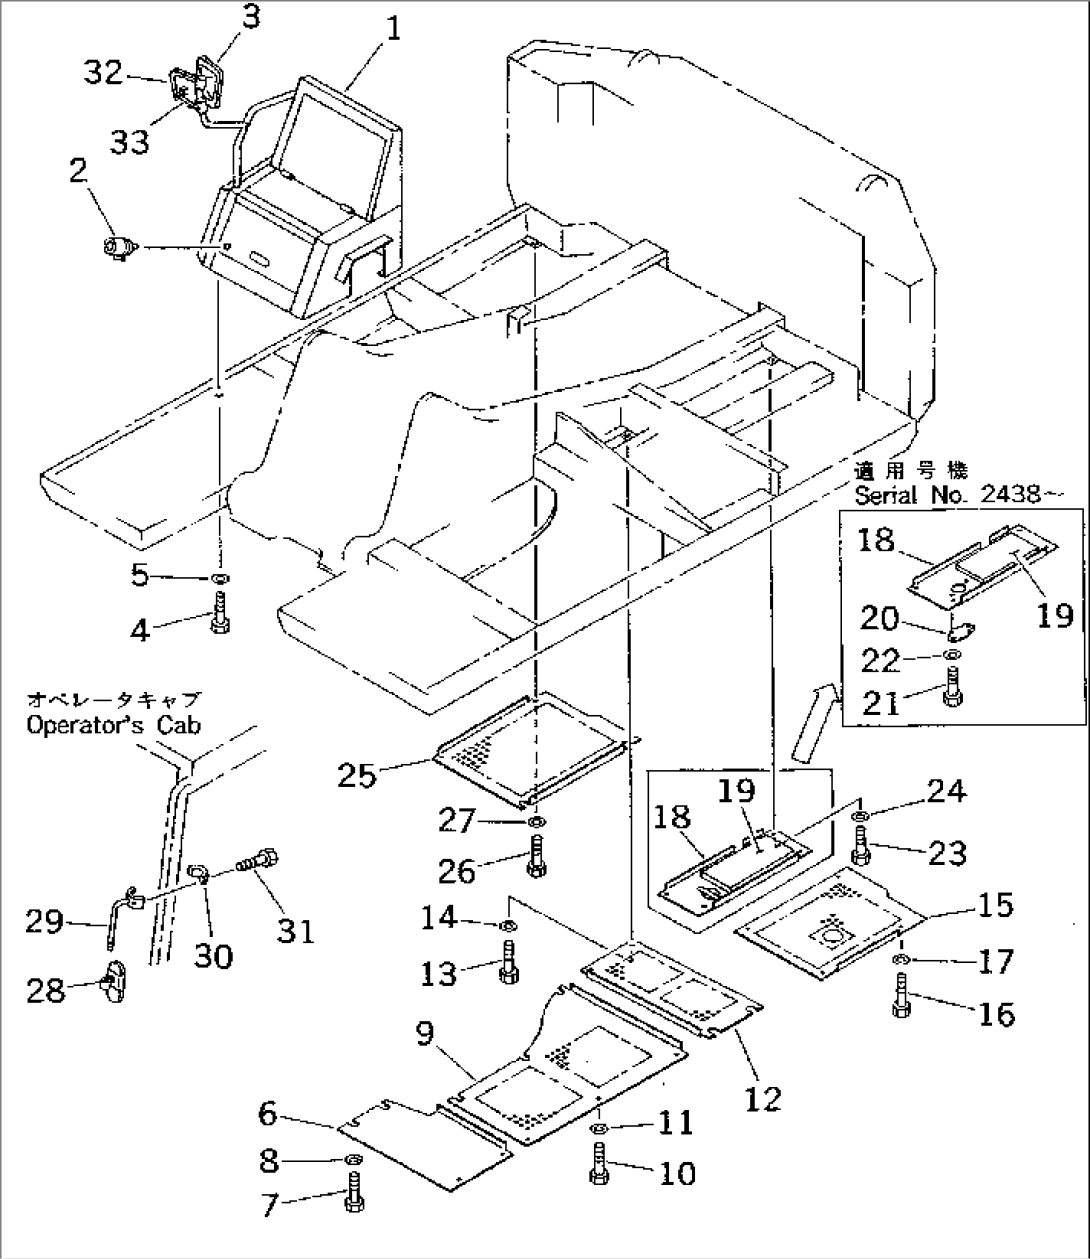 MACHINERY COMPARTMENT (3/3)(#2301-)